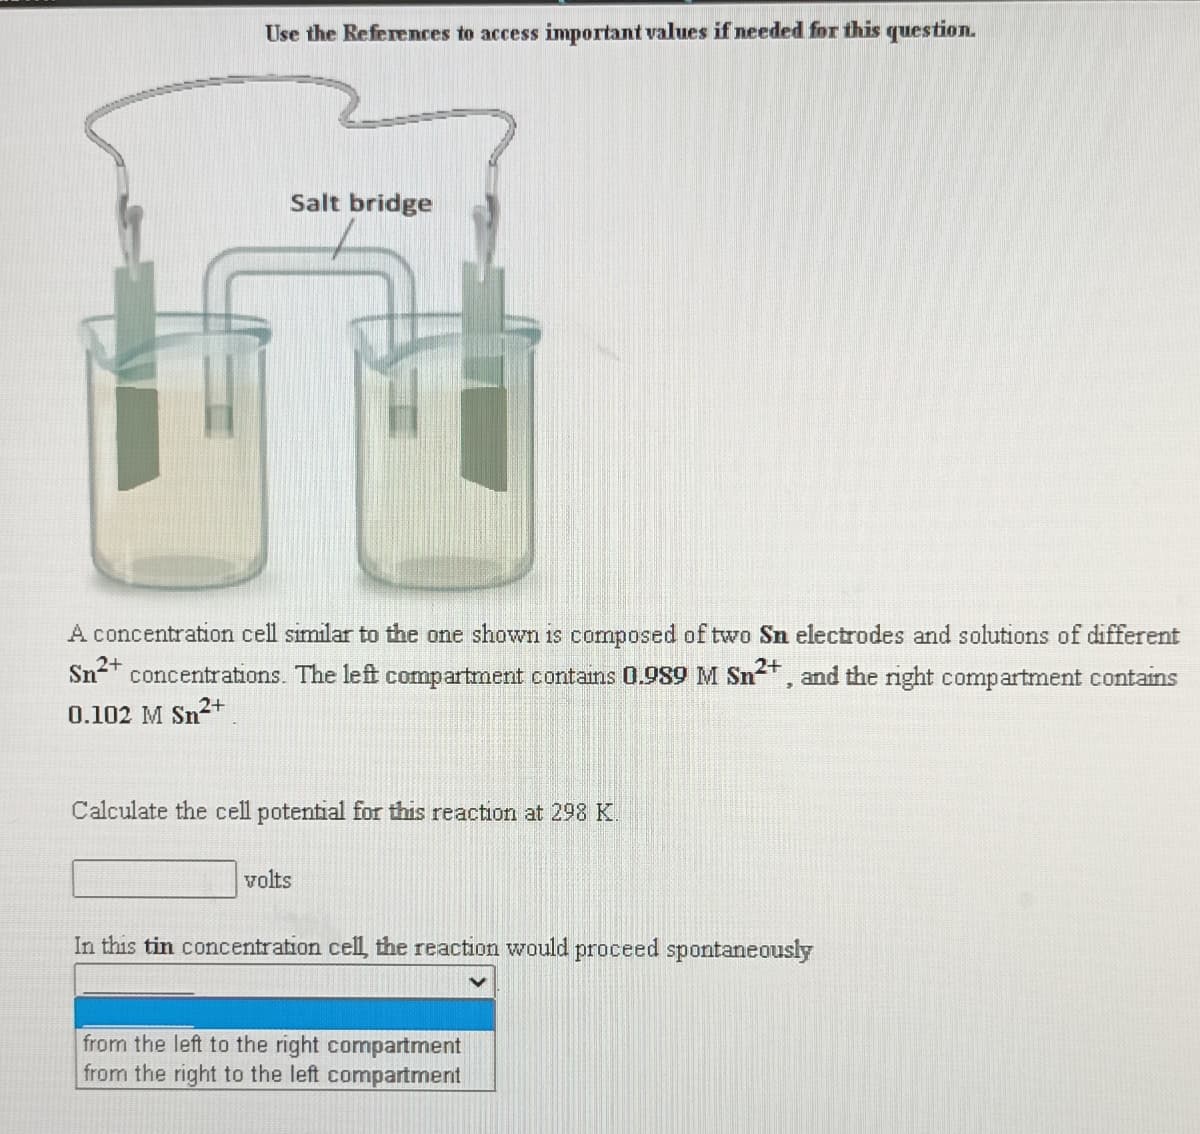 Use the References to access important values if needed for this question.
Salt bridge
A concentration cell similar to the one shown is composed of two Sn electrodes and solutions of different
Sn-* concentrations. The left compartment contains 0.989 M Sn2+, and the right compartment contains
0.102 M Sn2+
Calculate the cell potential for this reaction at 298 K.
volts
In this tin concentration cell, the reaction would proceed spontaneously
from the left to the right compartment
from the right to the left compartment
